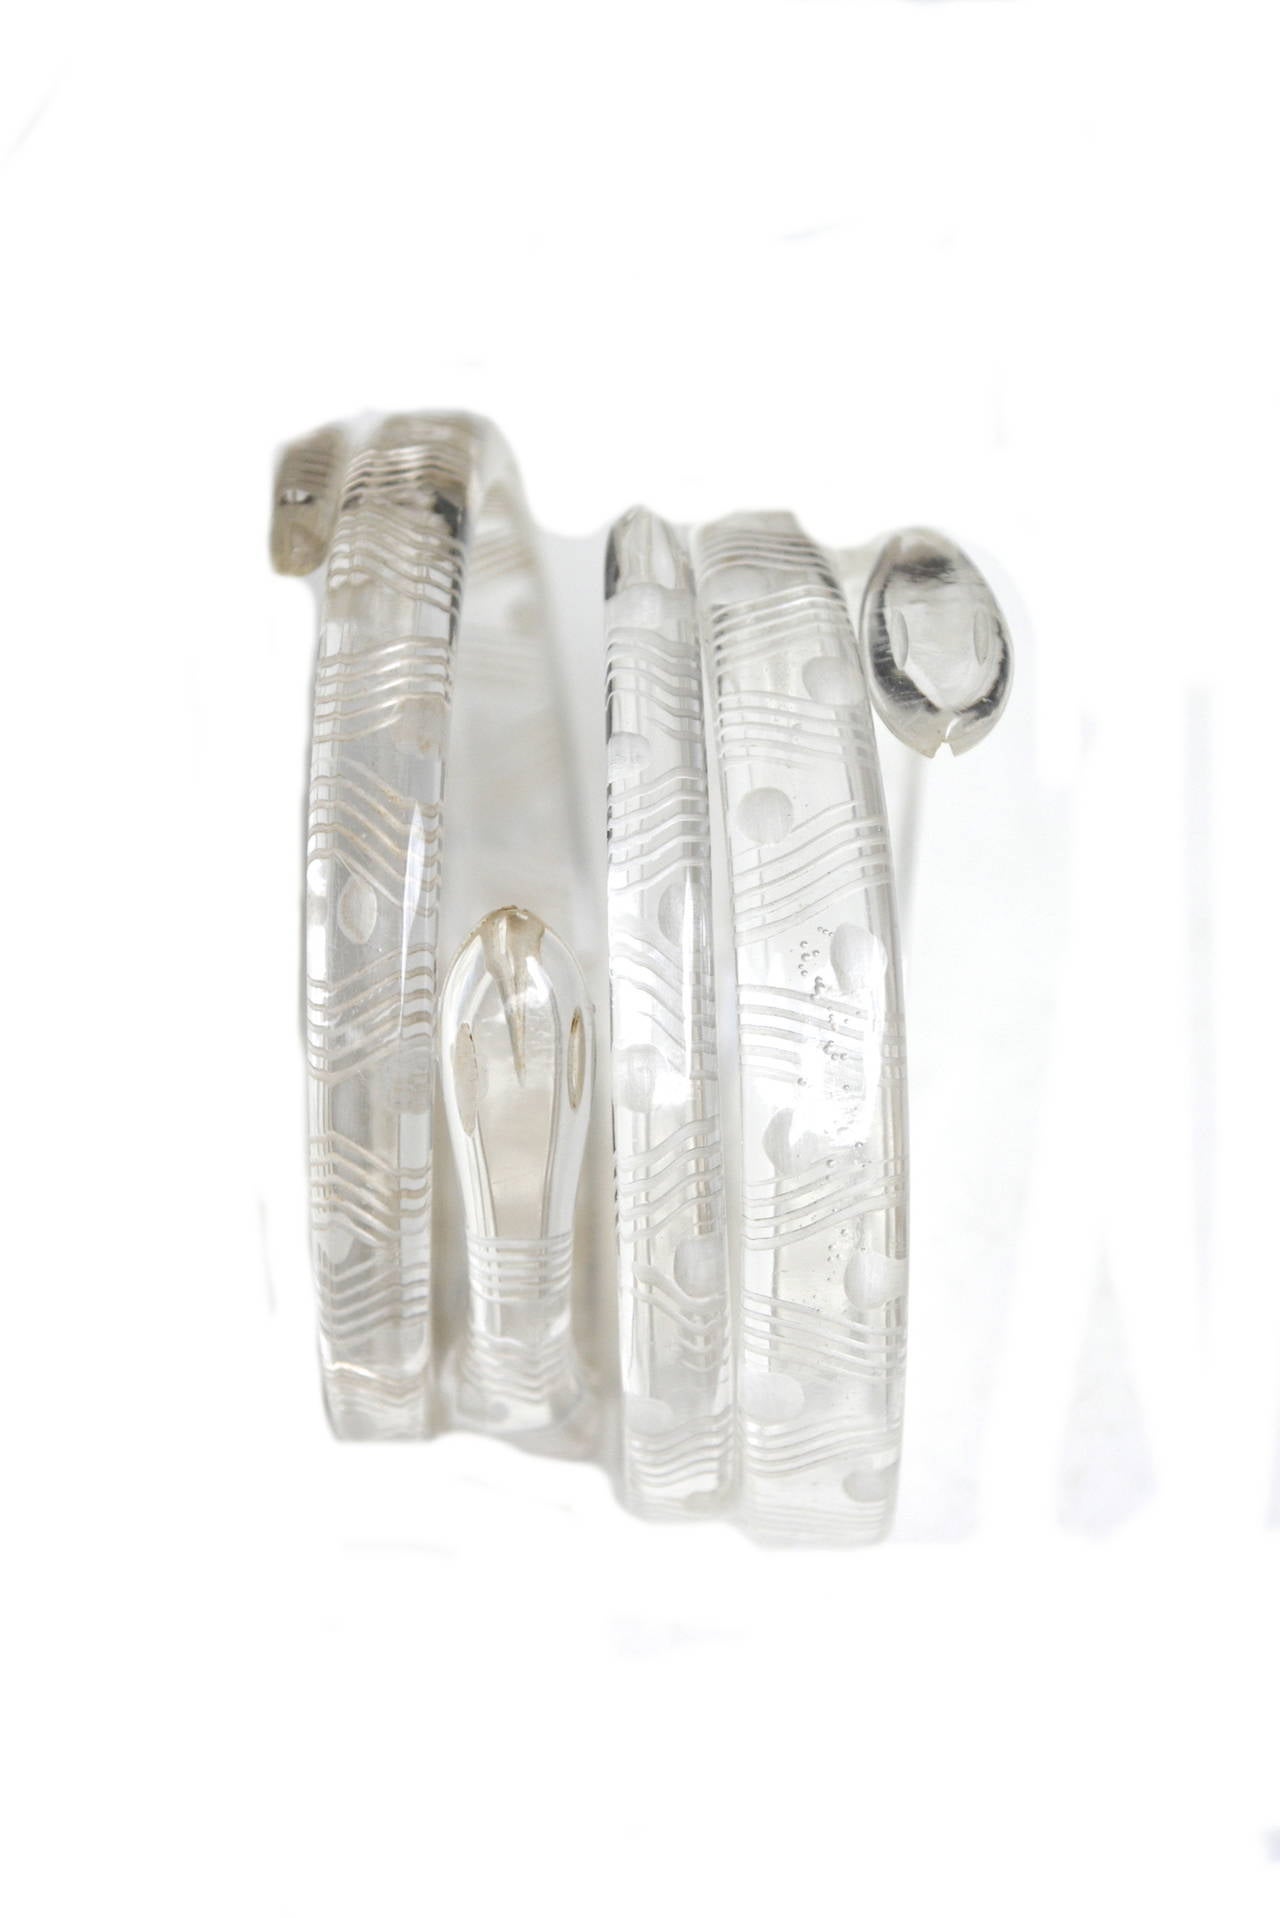 Fantastic 1920s-30s carved clear celluloid or lucite acrylic snake cuffs. Lucite was invented in 1931 by the Dupont company and these could be early lucite.  They feature carved heads, polka dots and wavy lines. Crisp and clear with minimal to no